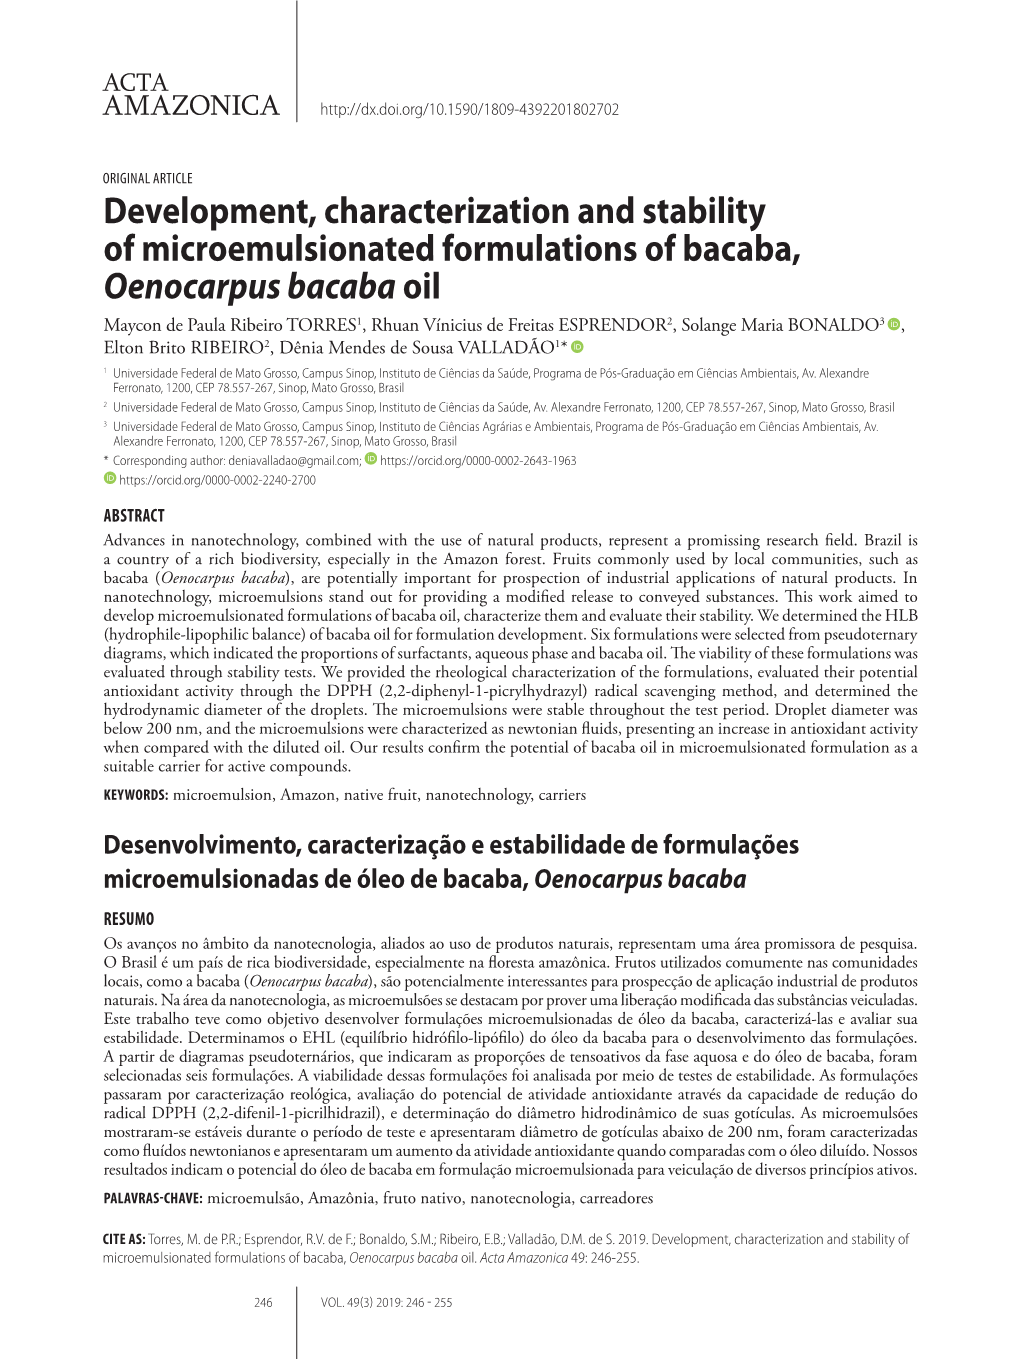 Development, Characterization and Stability of Microemulsionated